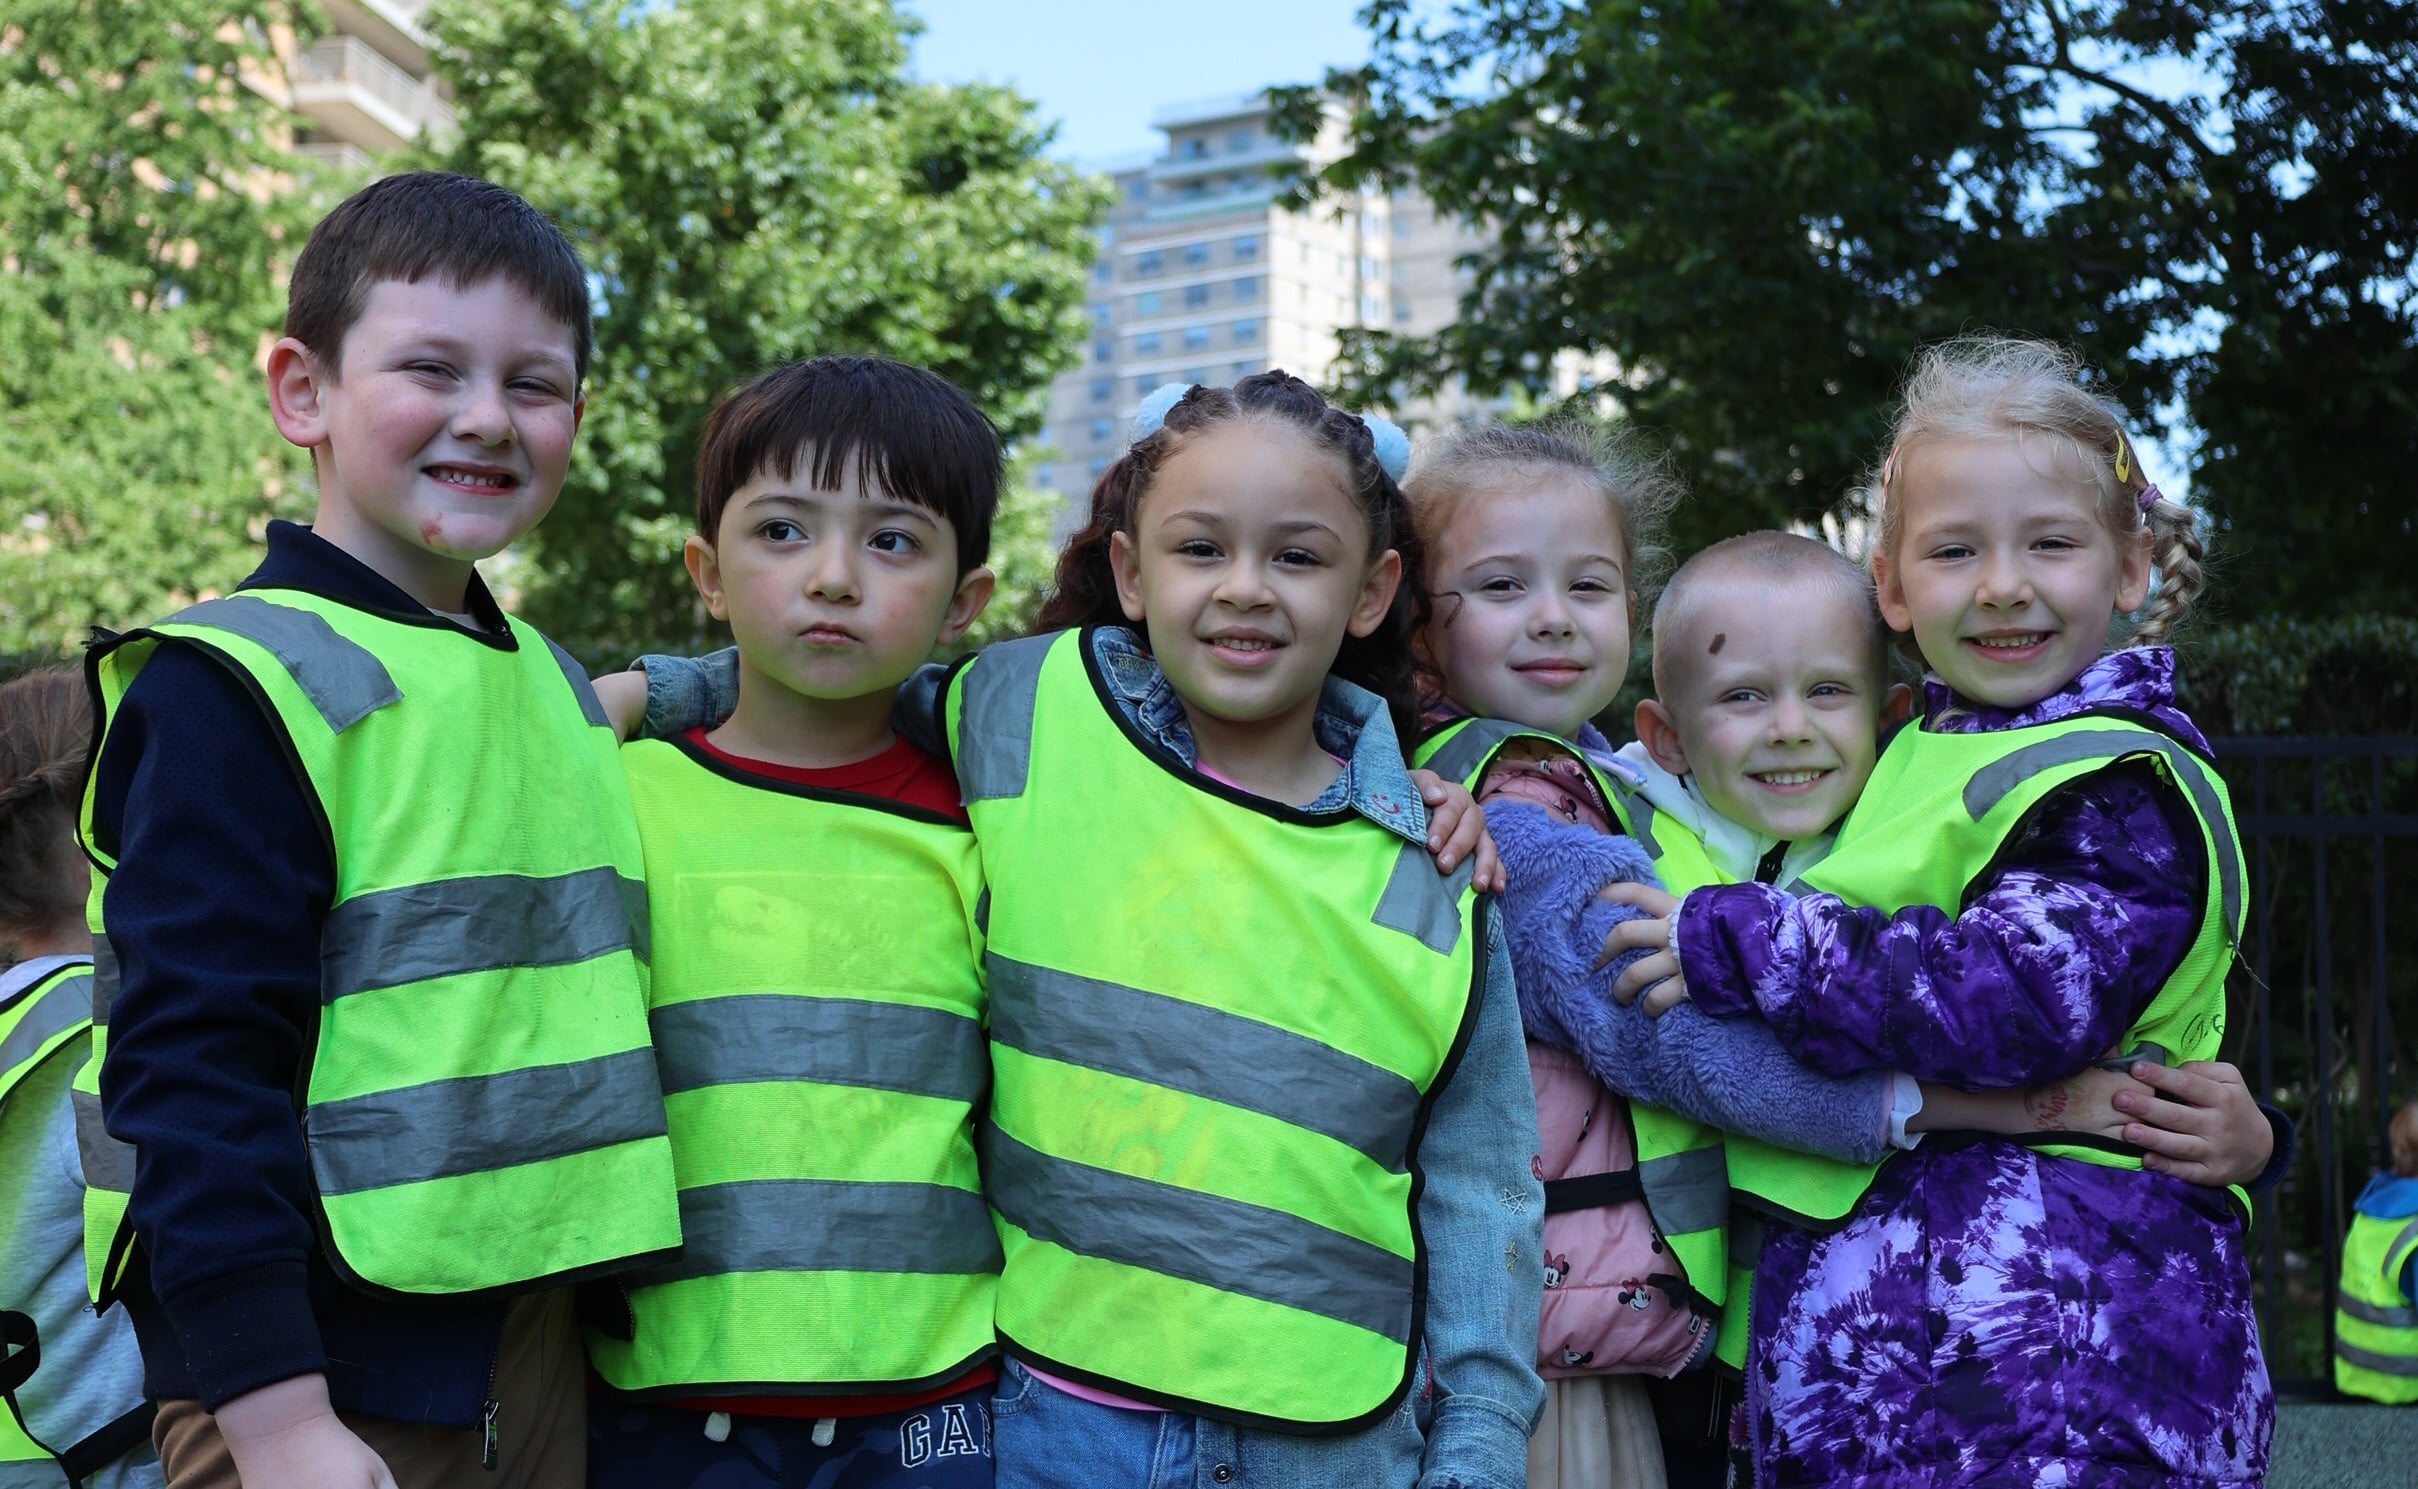 Group of children hugging and smiling during a spring outdoor educational activity